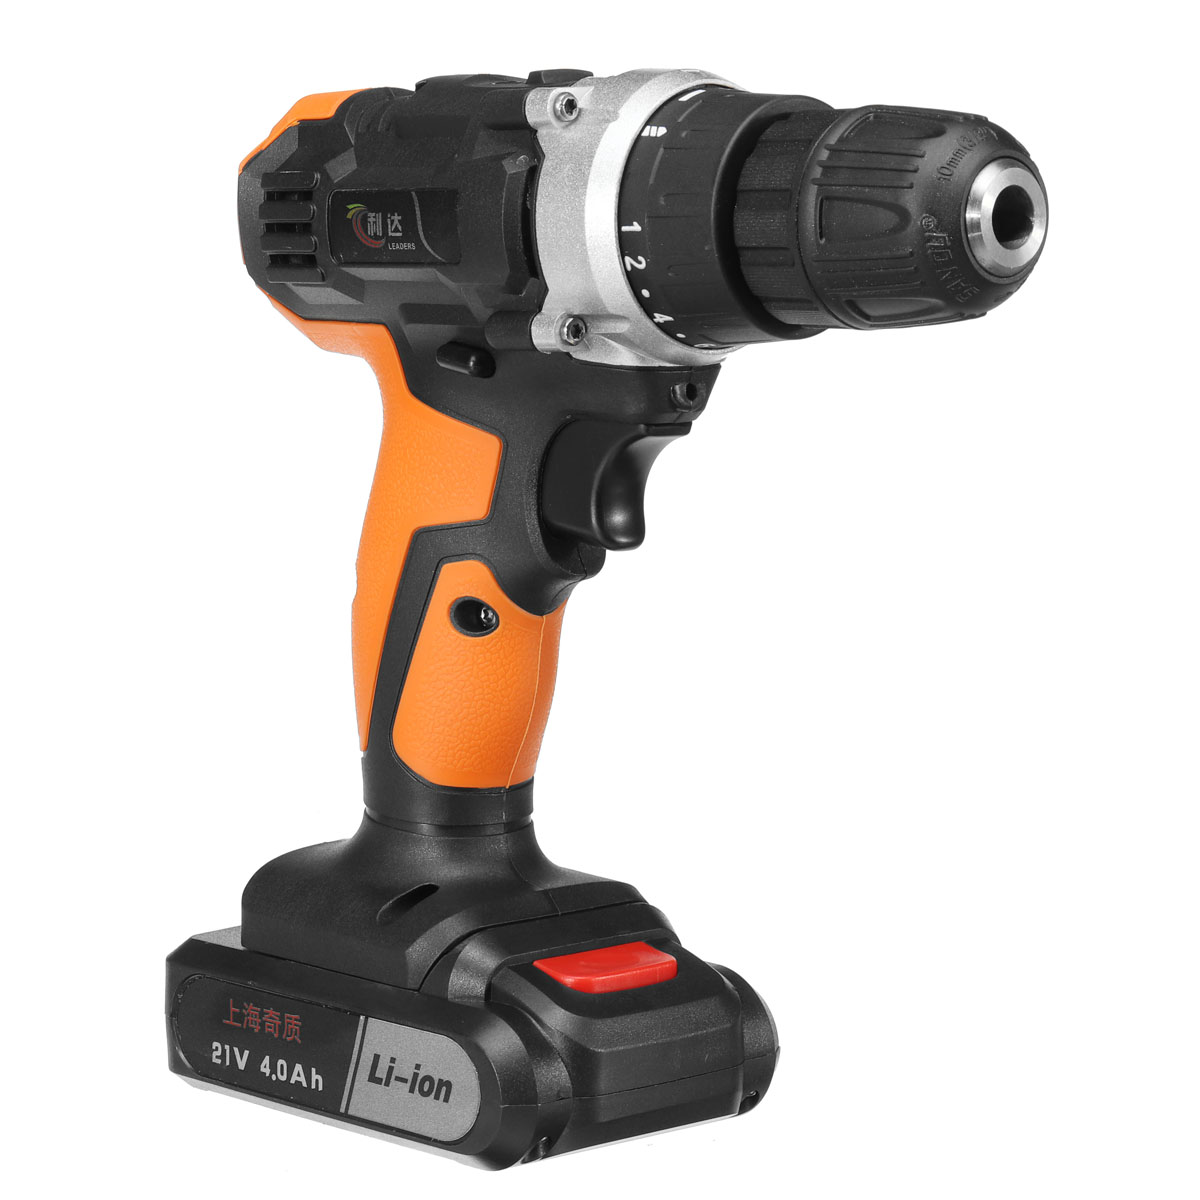 21V-4000mAh-Cordless-Rechargeable-Power-Drills-181-Electric-Screw-Driver-with-1-Li-ion-Battery-1399435